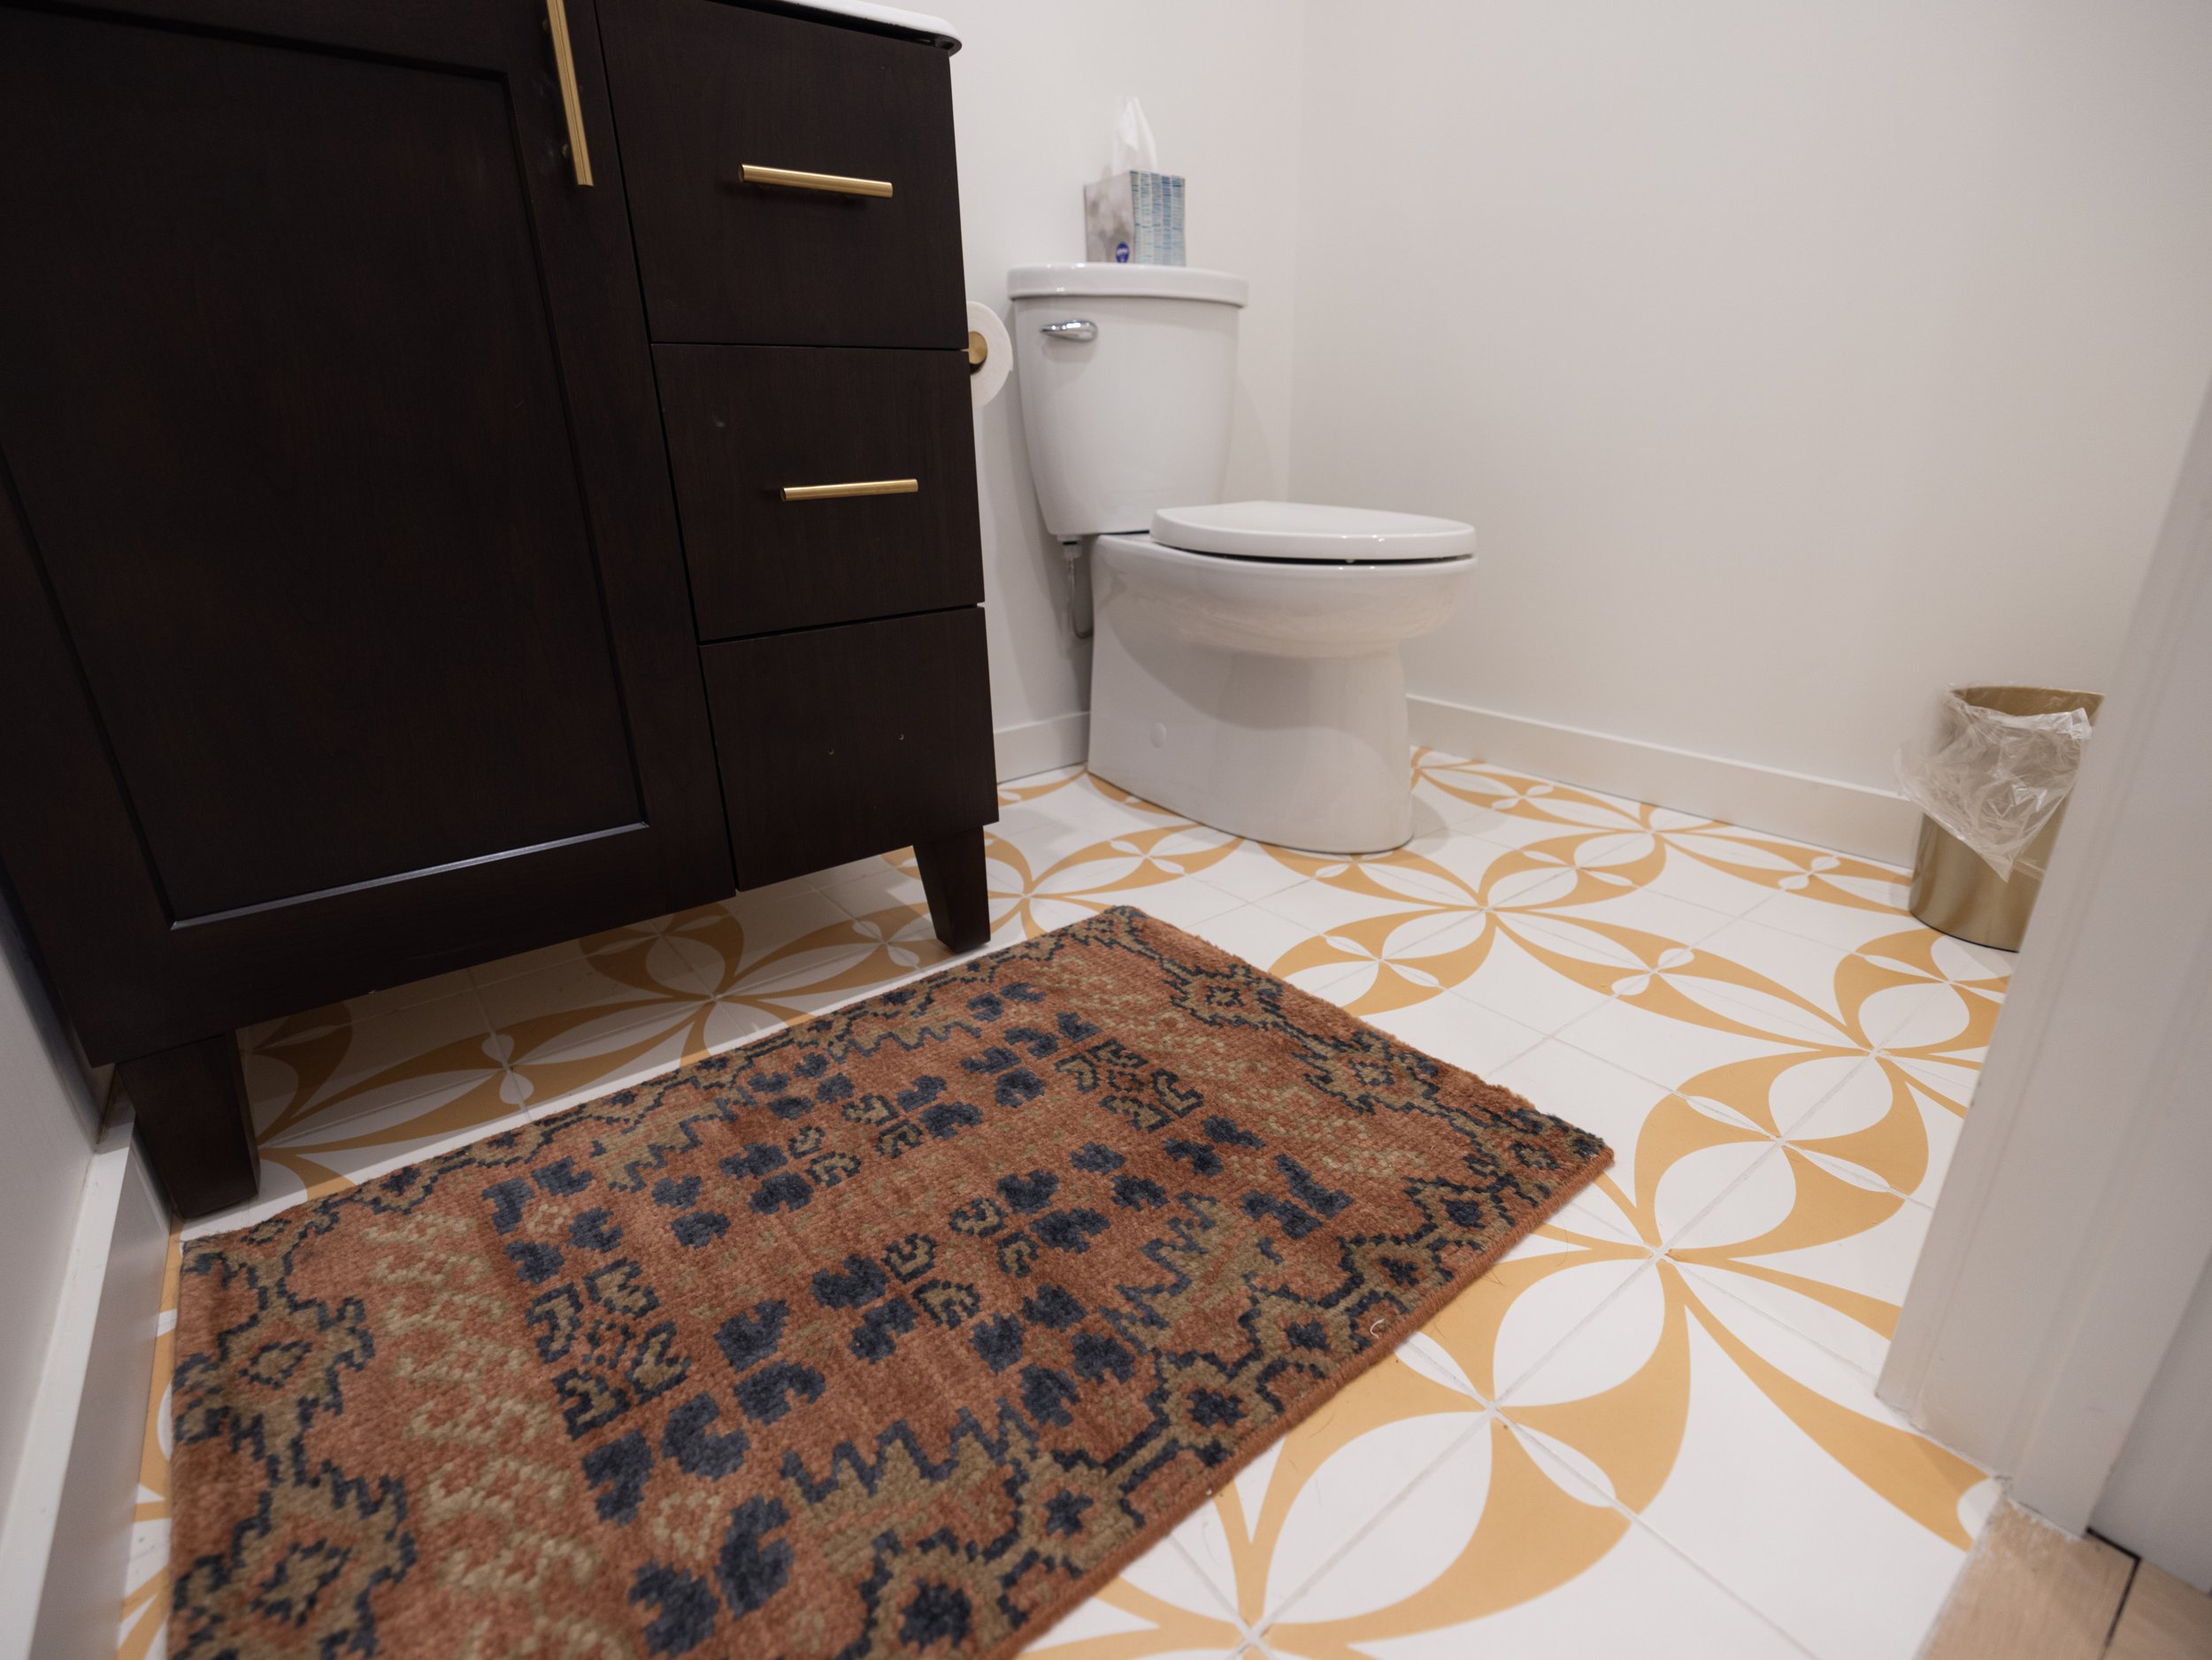 Whirl _ Patterned Tile_ Clay Imports _ Design by Matt Risinger _ Install by The Tile Press _ 1.jpg